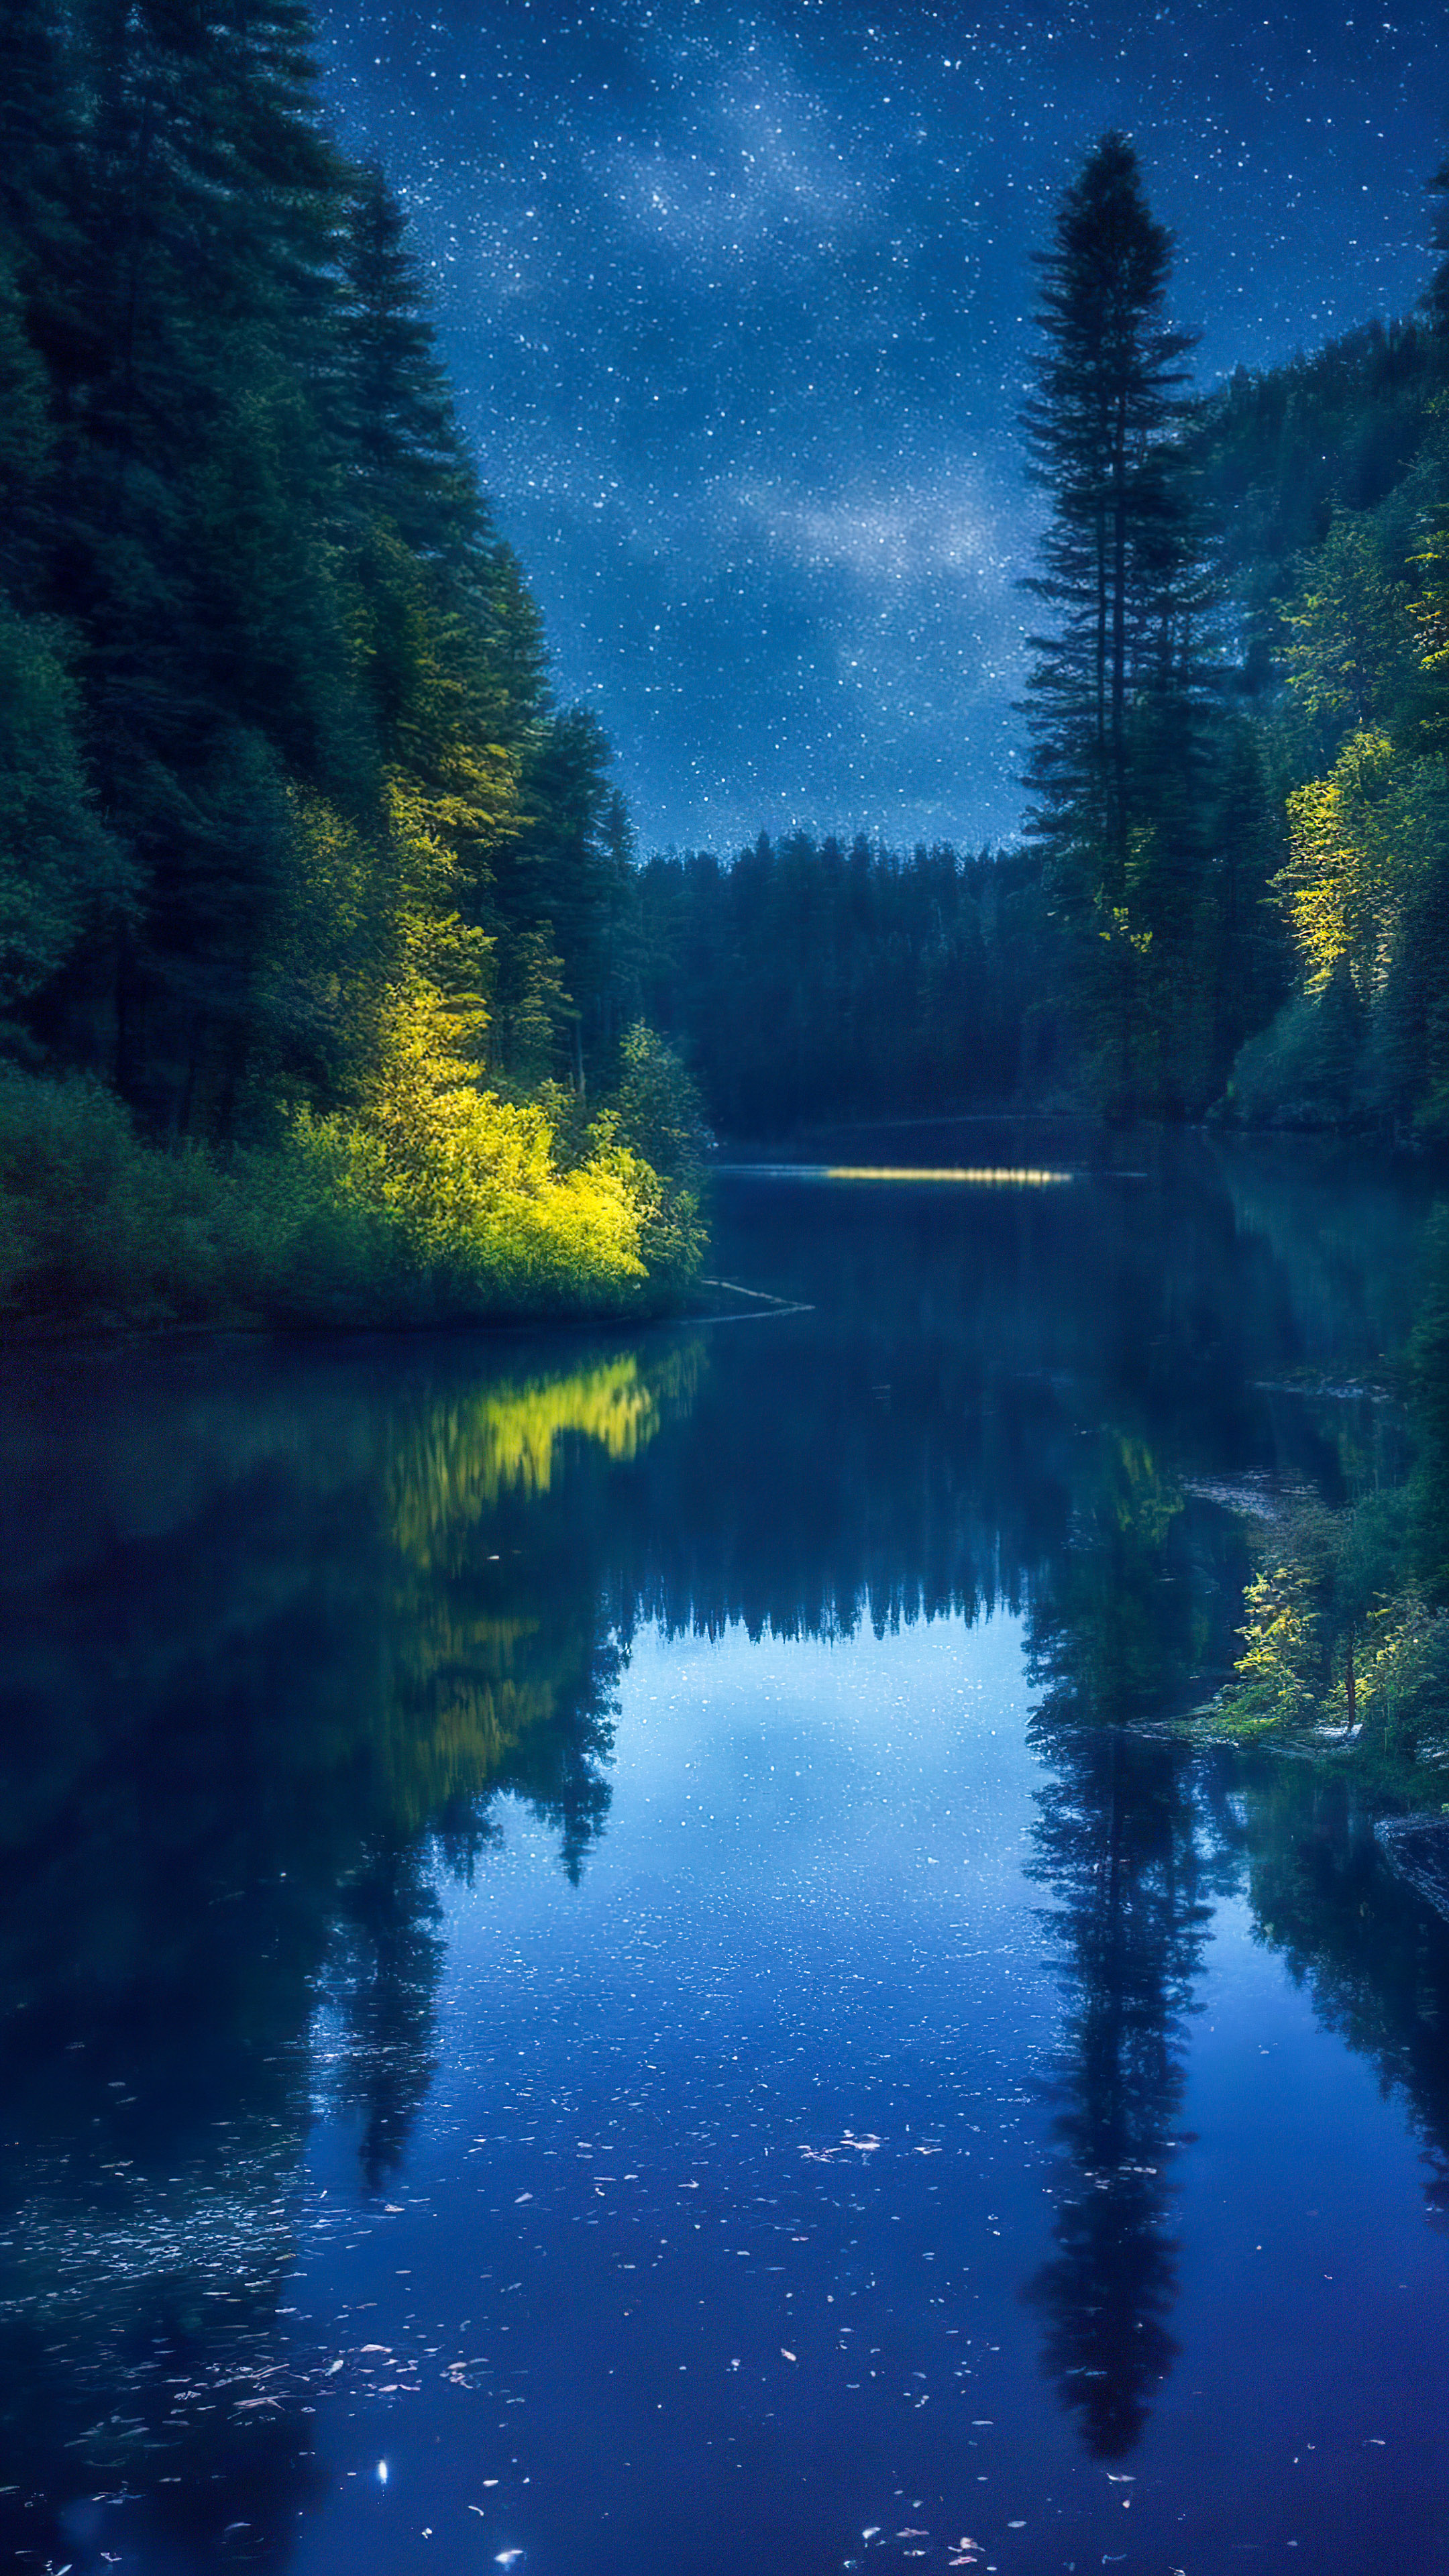 Get lost in the serenity with our background for mobile, showcasing a peaceful river winding through a dense forest at night, reflecting the sparkling night sky.